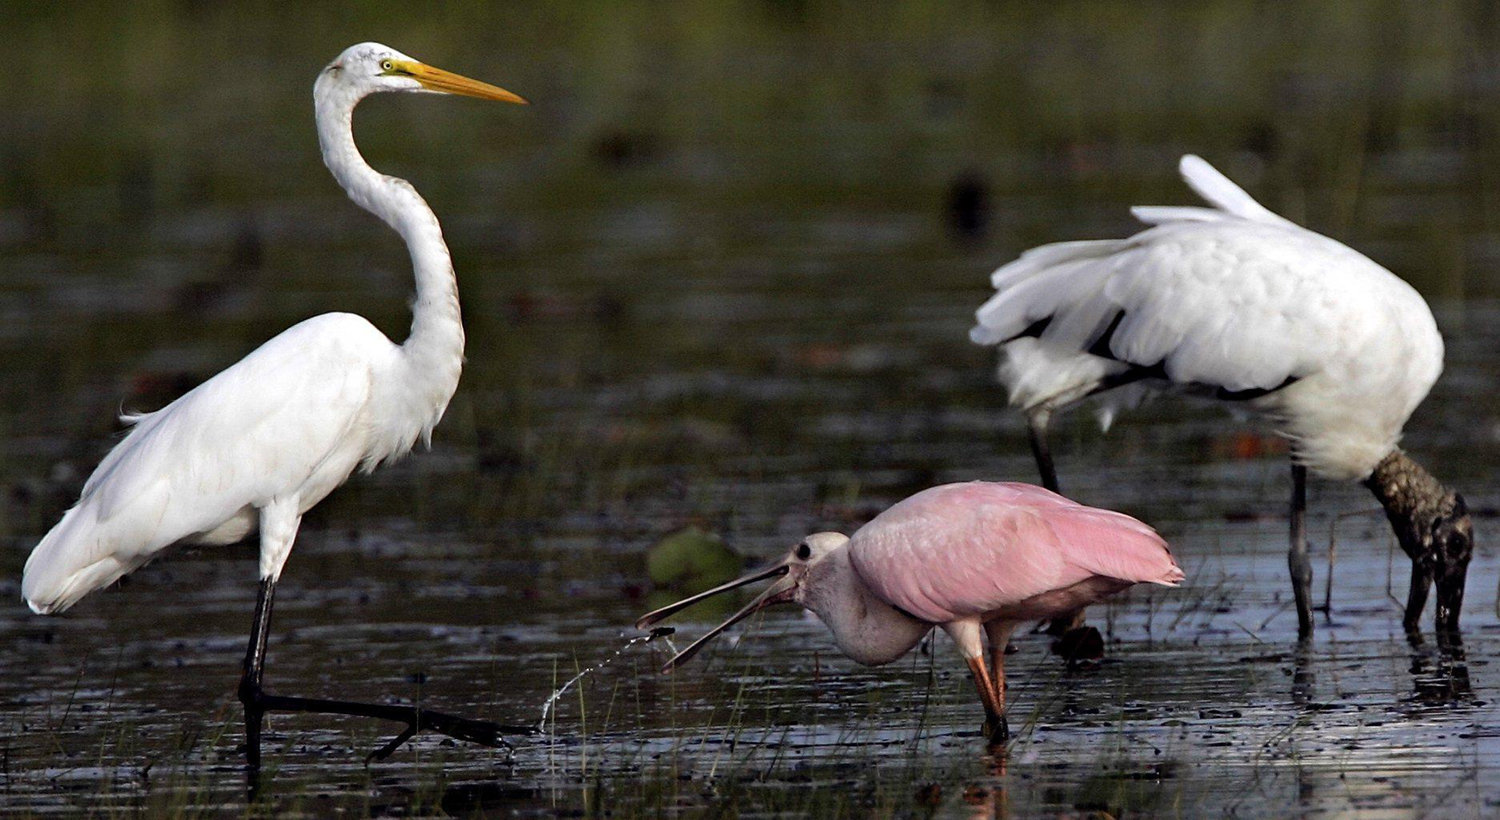 A roseate spoonbill, center, grabs an afternoon snack, probably a small fish or frog, into its mouth while feeding alongside a great egret, left, and an endangered wood stork, right, in the Savannas Preserve State Park near Port St. Lucie, Florida. (Paul J. Milette/The Palm Beach Post/TNS)